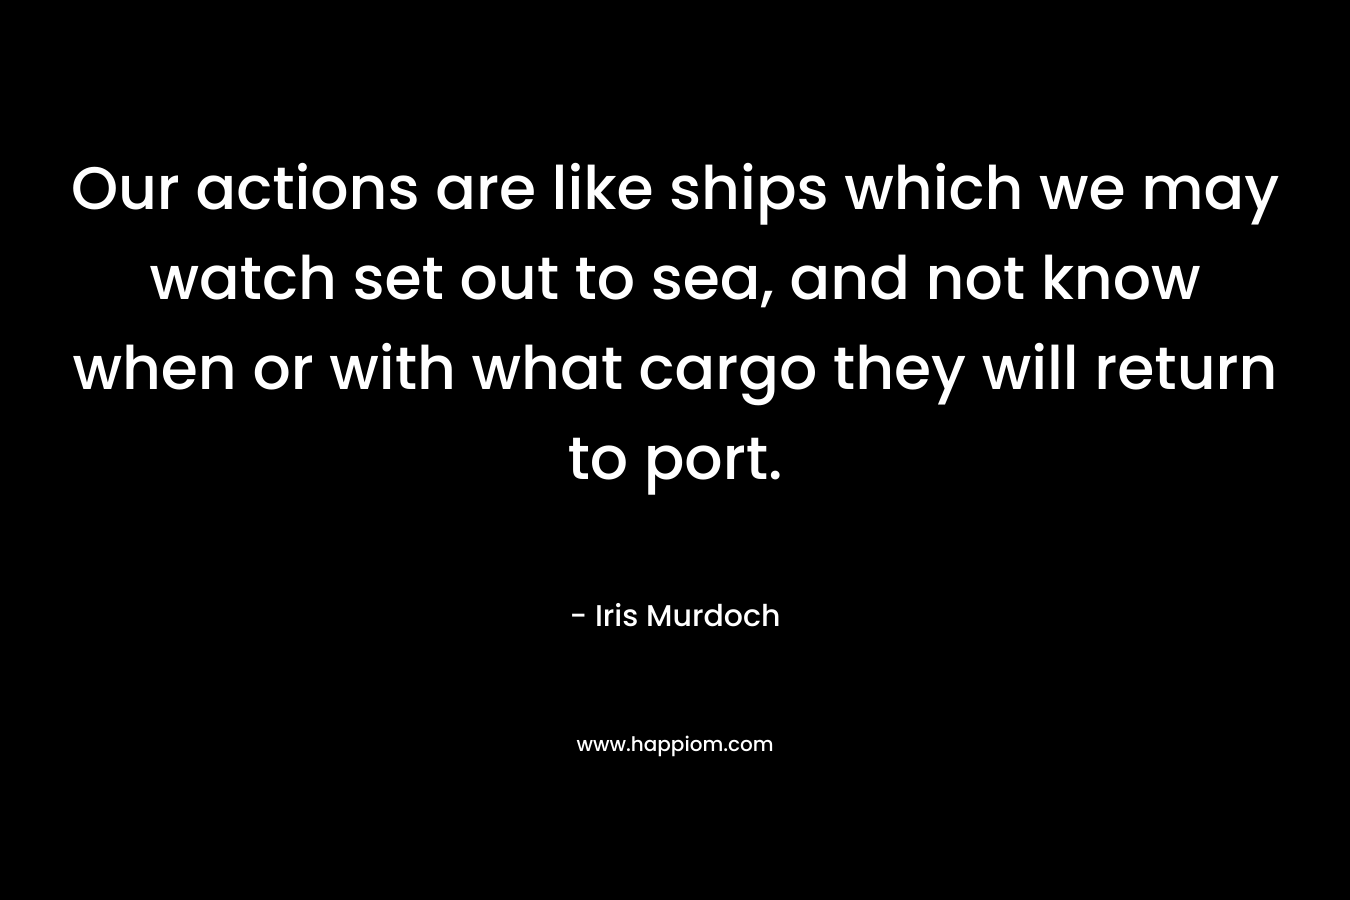 Our actions are like ships which we may watch set out to sea, and not know when or with what cargo they will return to port. – Iris Murdoch